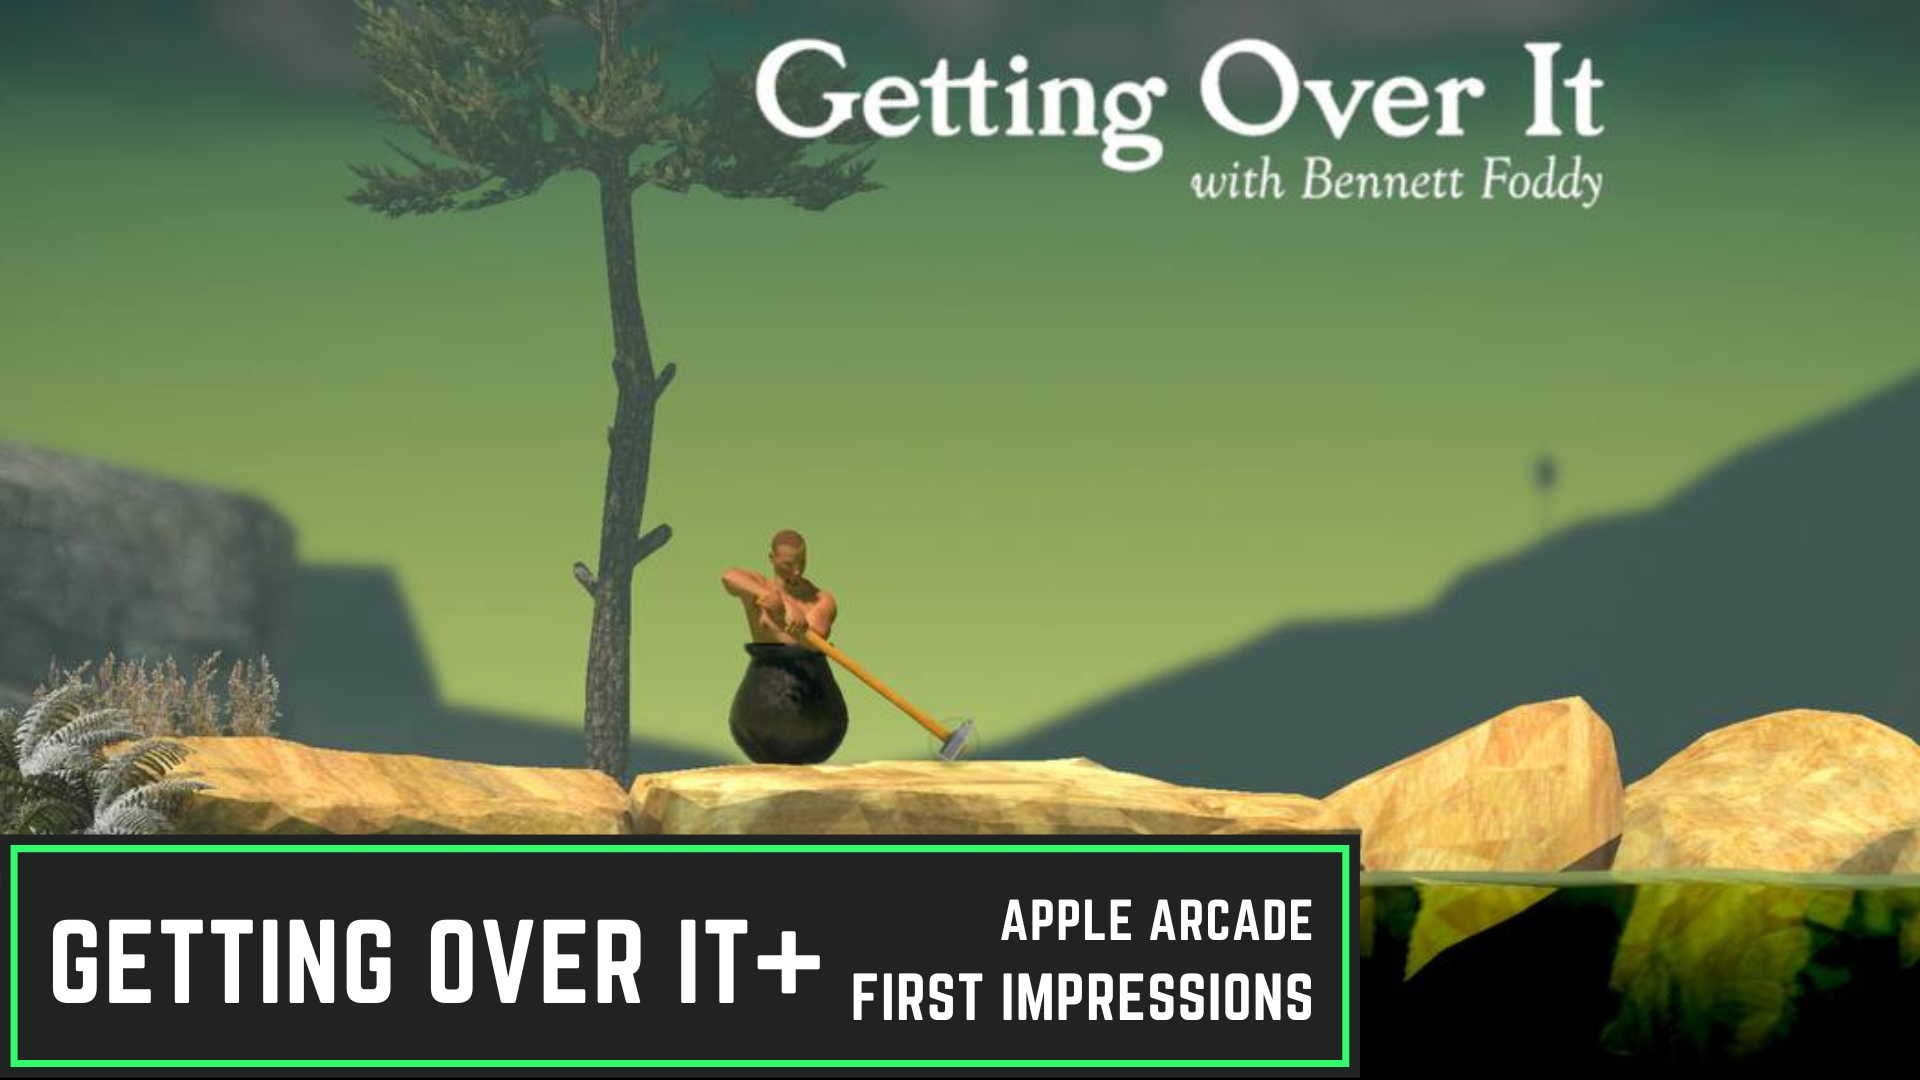 How to make controls like getting over it with benett foddy